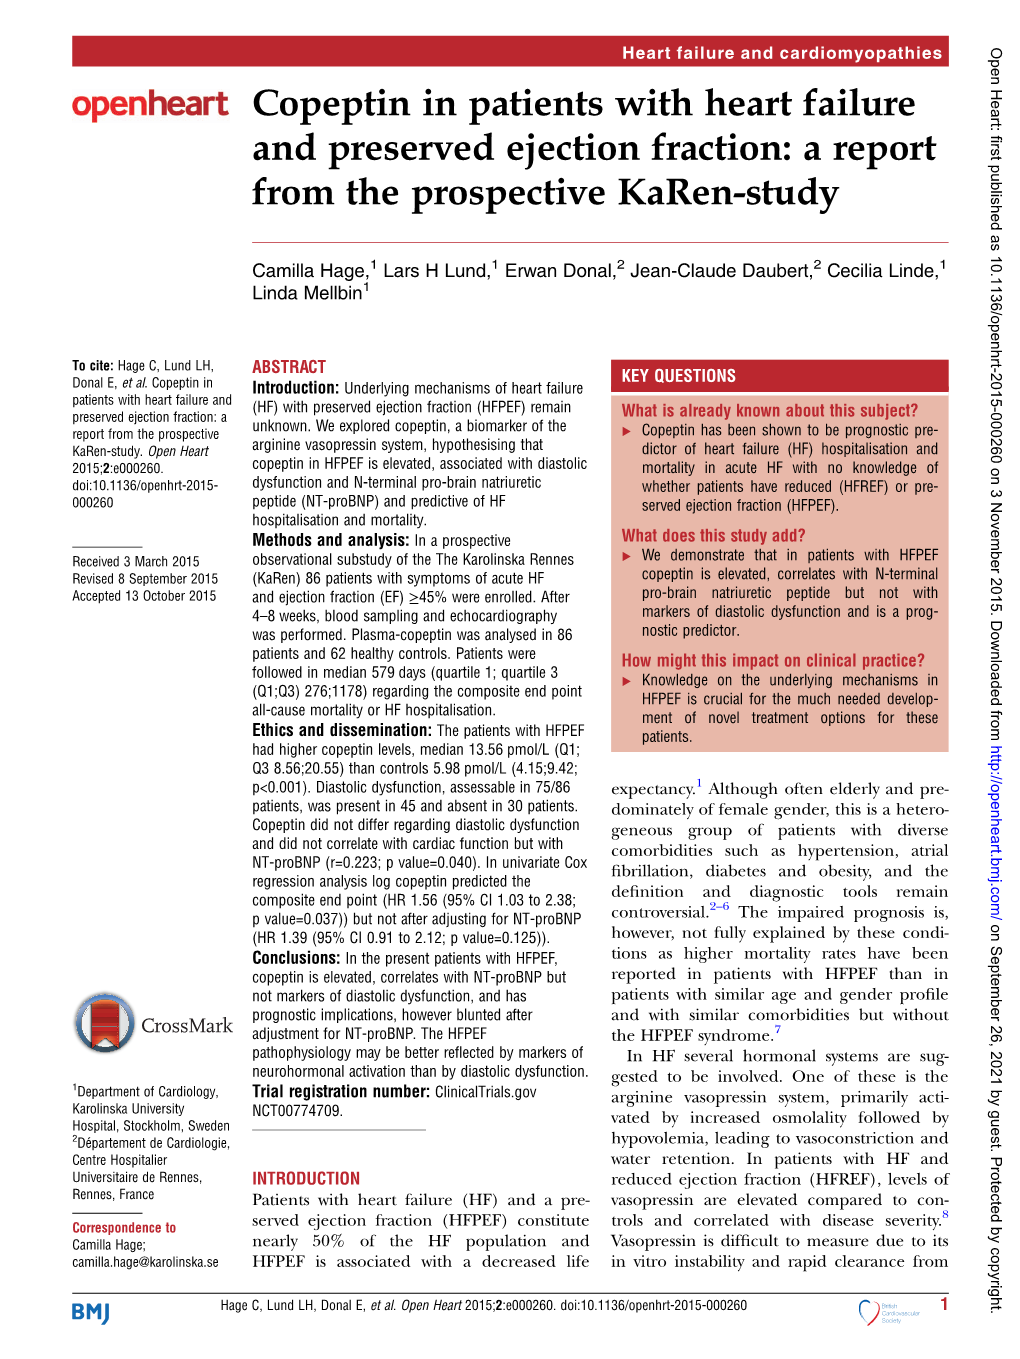 Copeptin in Patients with Heart Failure and Preserved Ejection Fraction: a Report from the Prospective Karen-Study